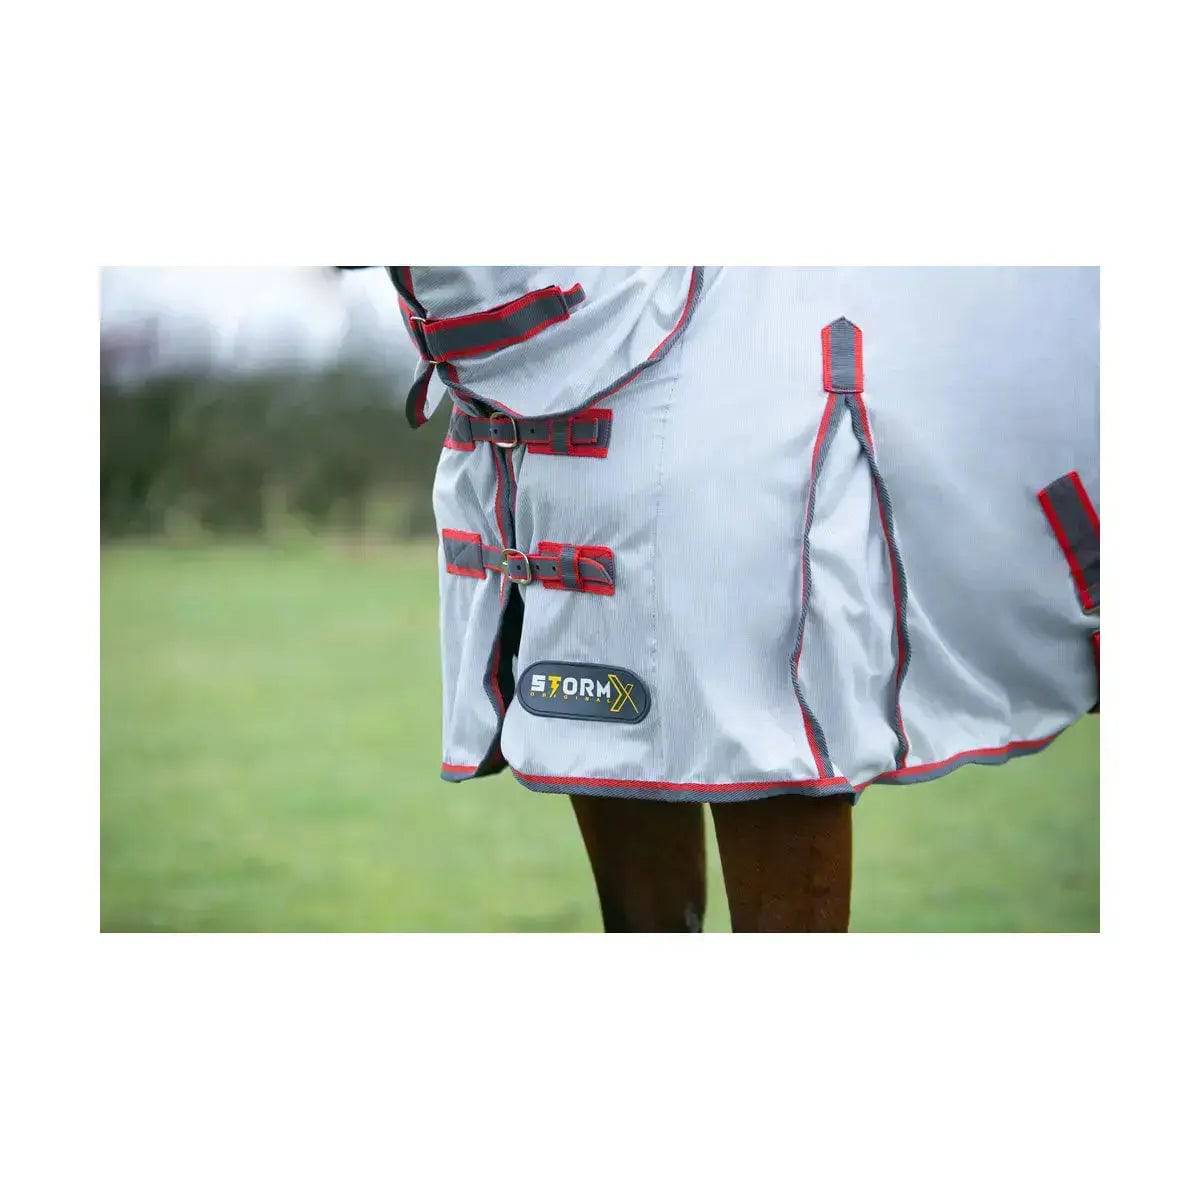 StormX Original Protect Full Neck Fly Rug White / Grey / Red 4'6' HY Equestrian Fly Rugs Barnstaple Equestrian Supplies